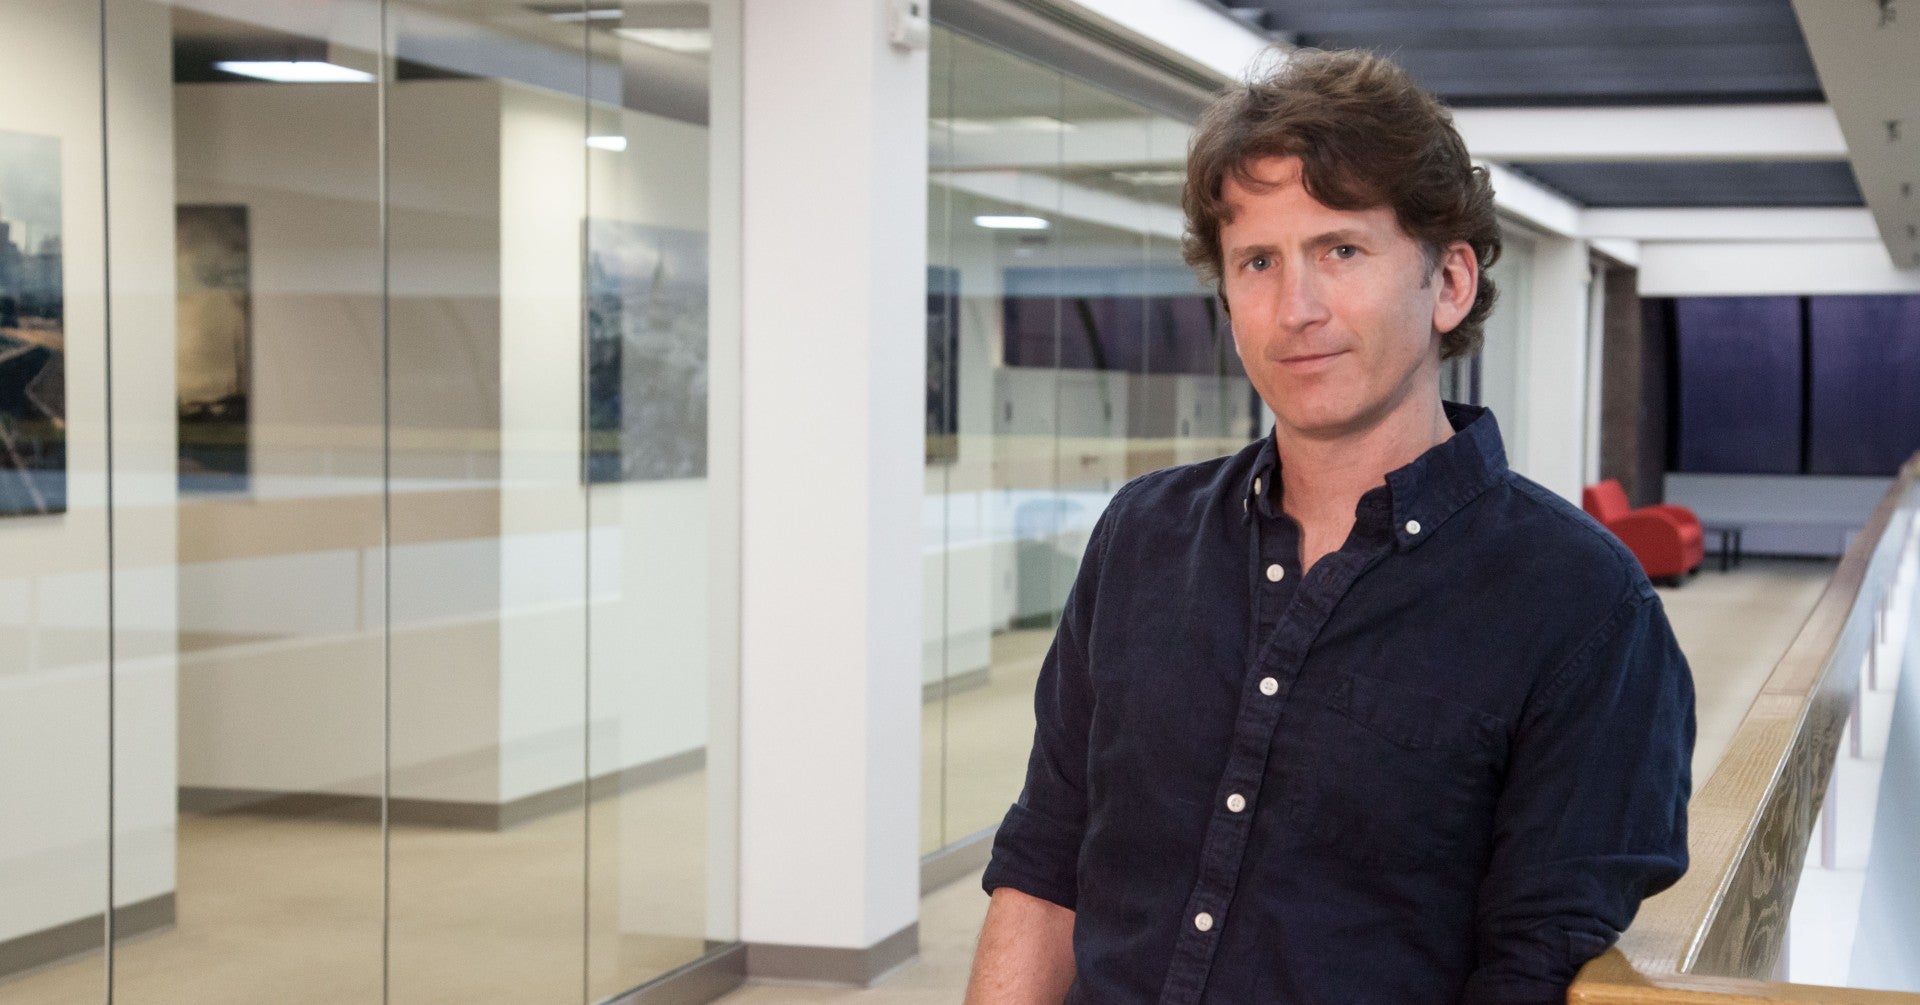 Image for Saved by Morrowind, striving for Starfield: Todd Howard and the story of Bethesda